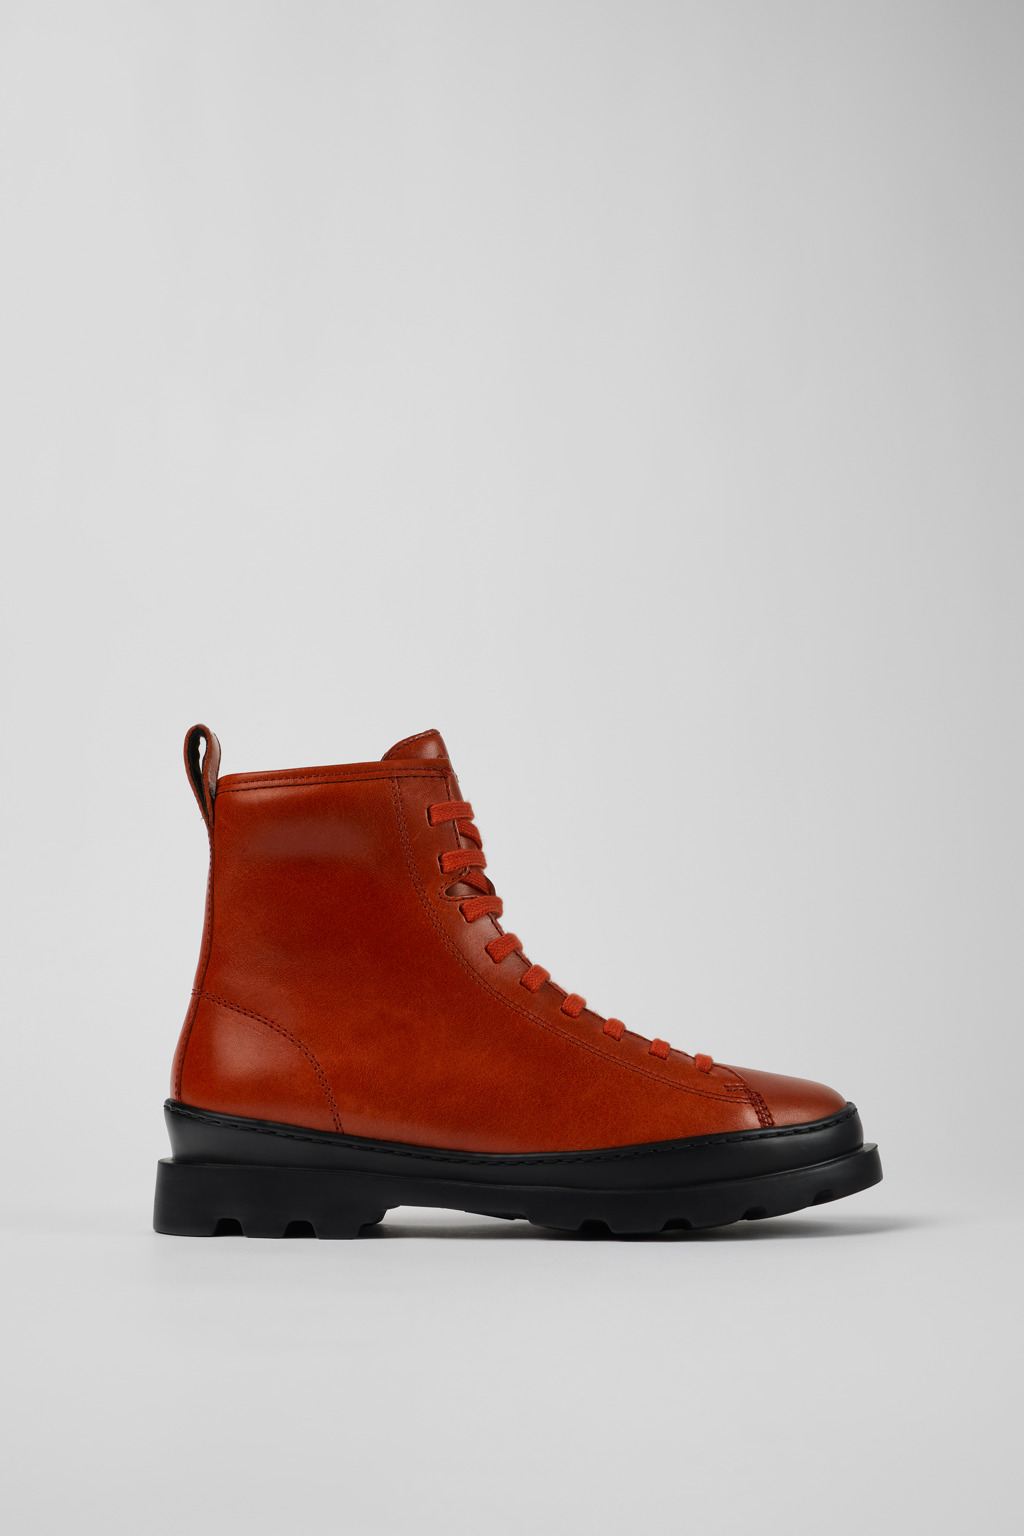 Brutus Red Ankle Boots for Women - Camper Shoes